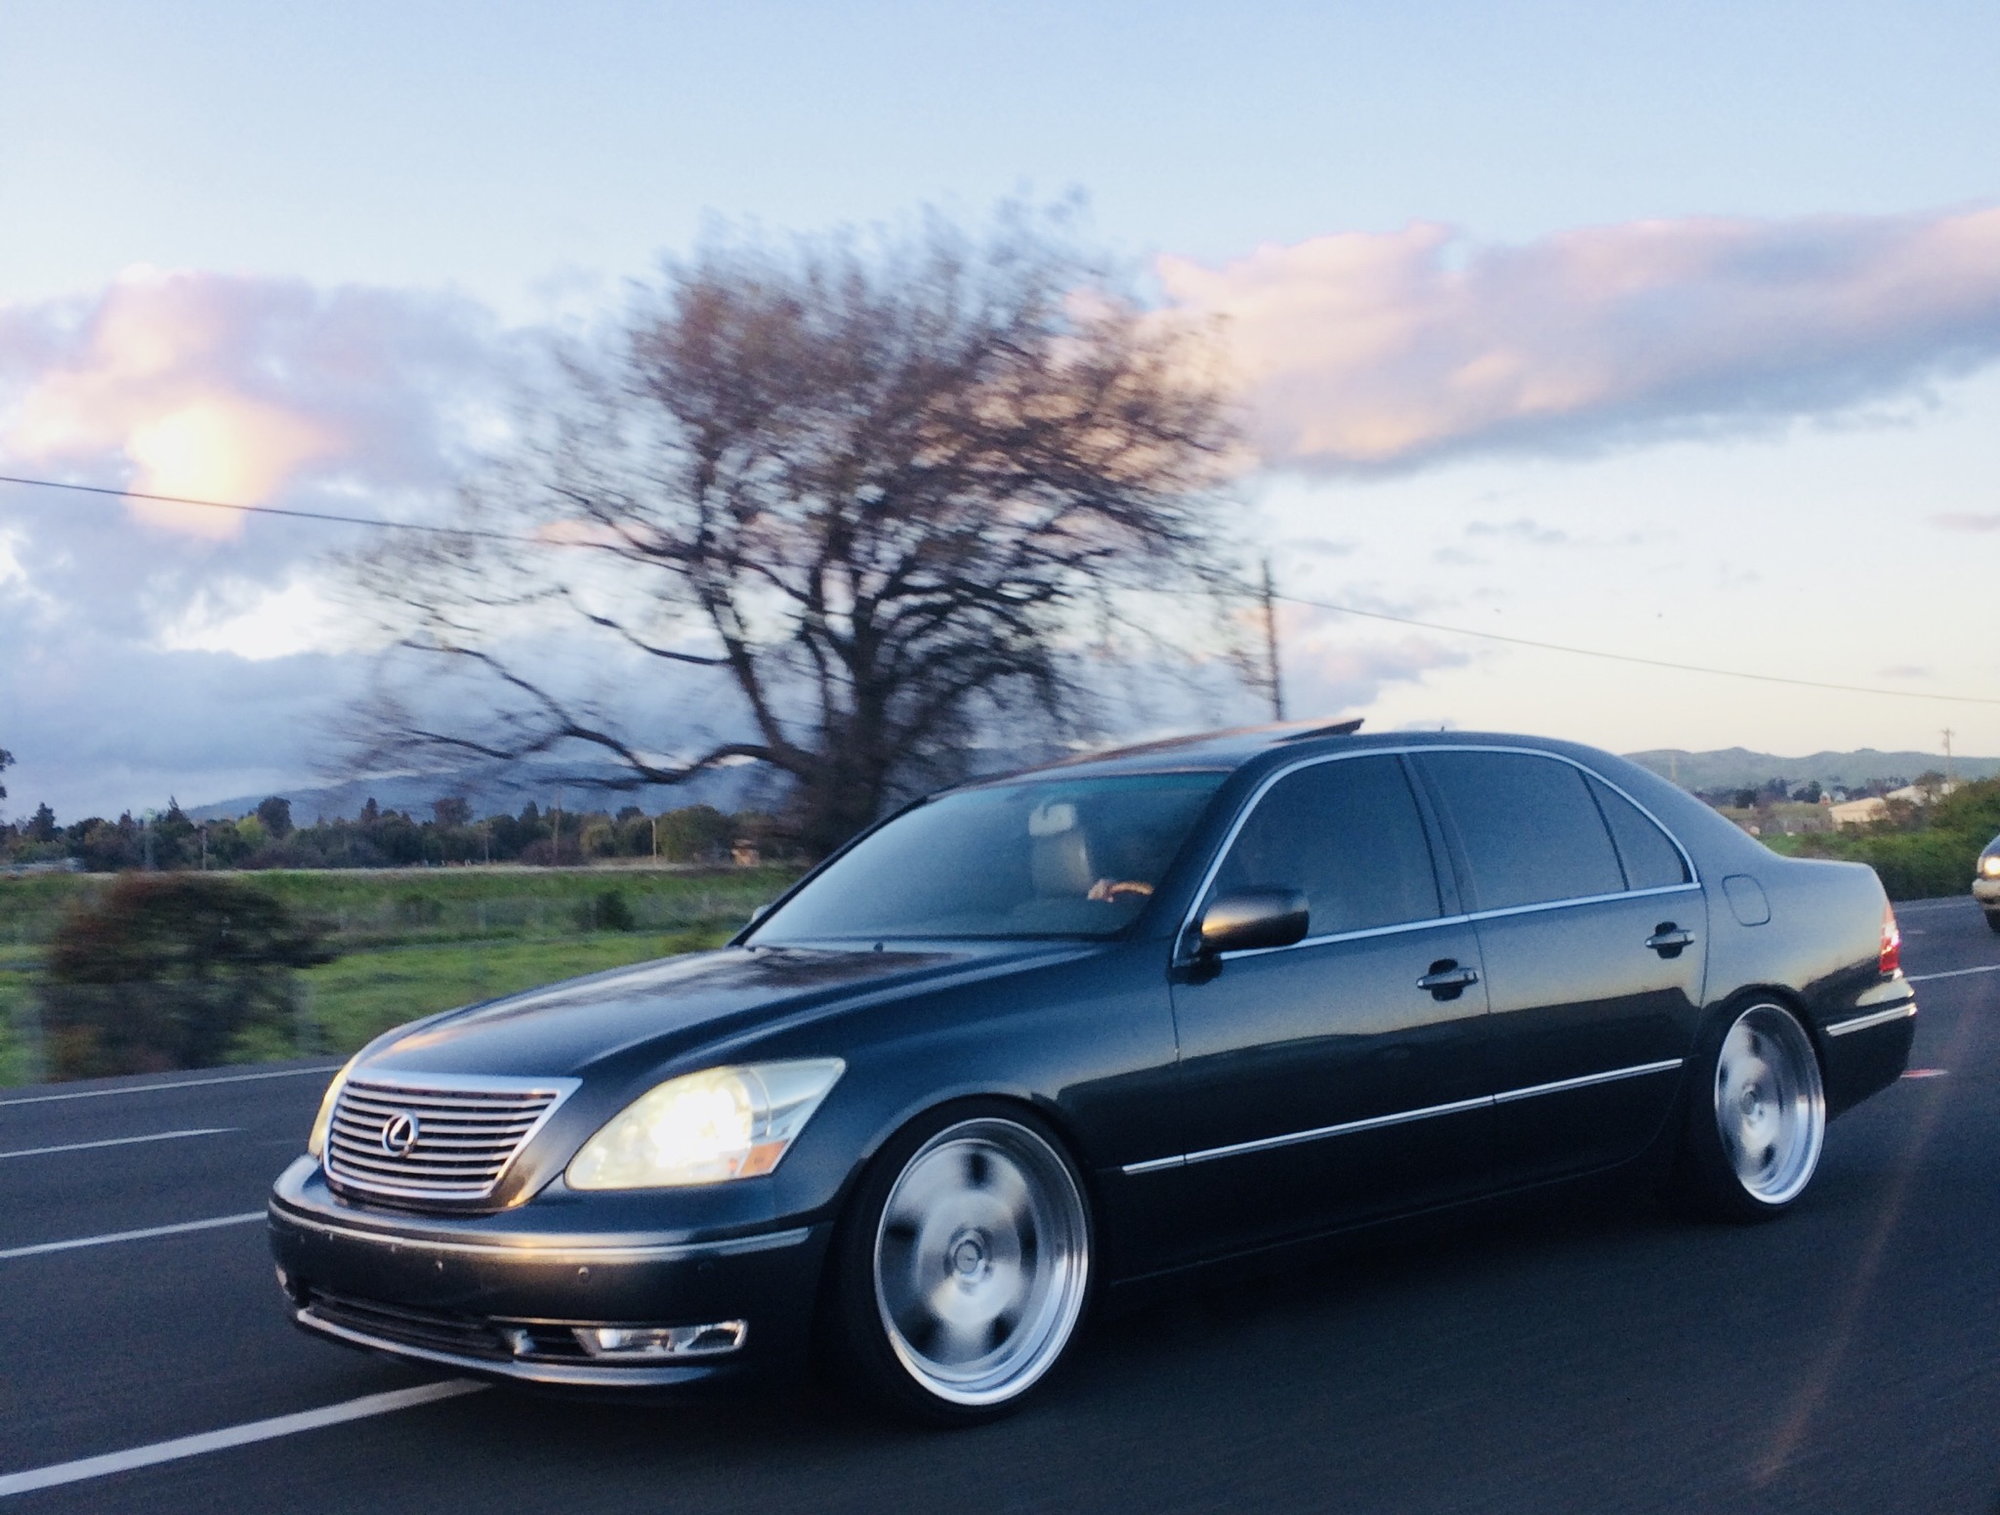 2005 Lexus LS430 - 2005 Lexus LS430 on BC coilovers - Used - VIN JTHBN36F950176929 - 179,000 Miles - 8 cyl - 2WD - Automatic - Sedan - Gray - Vallejo, CA 94591, United States